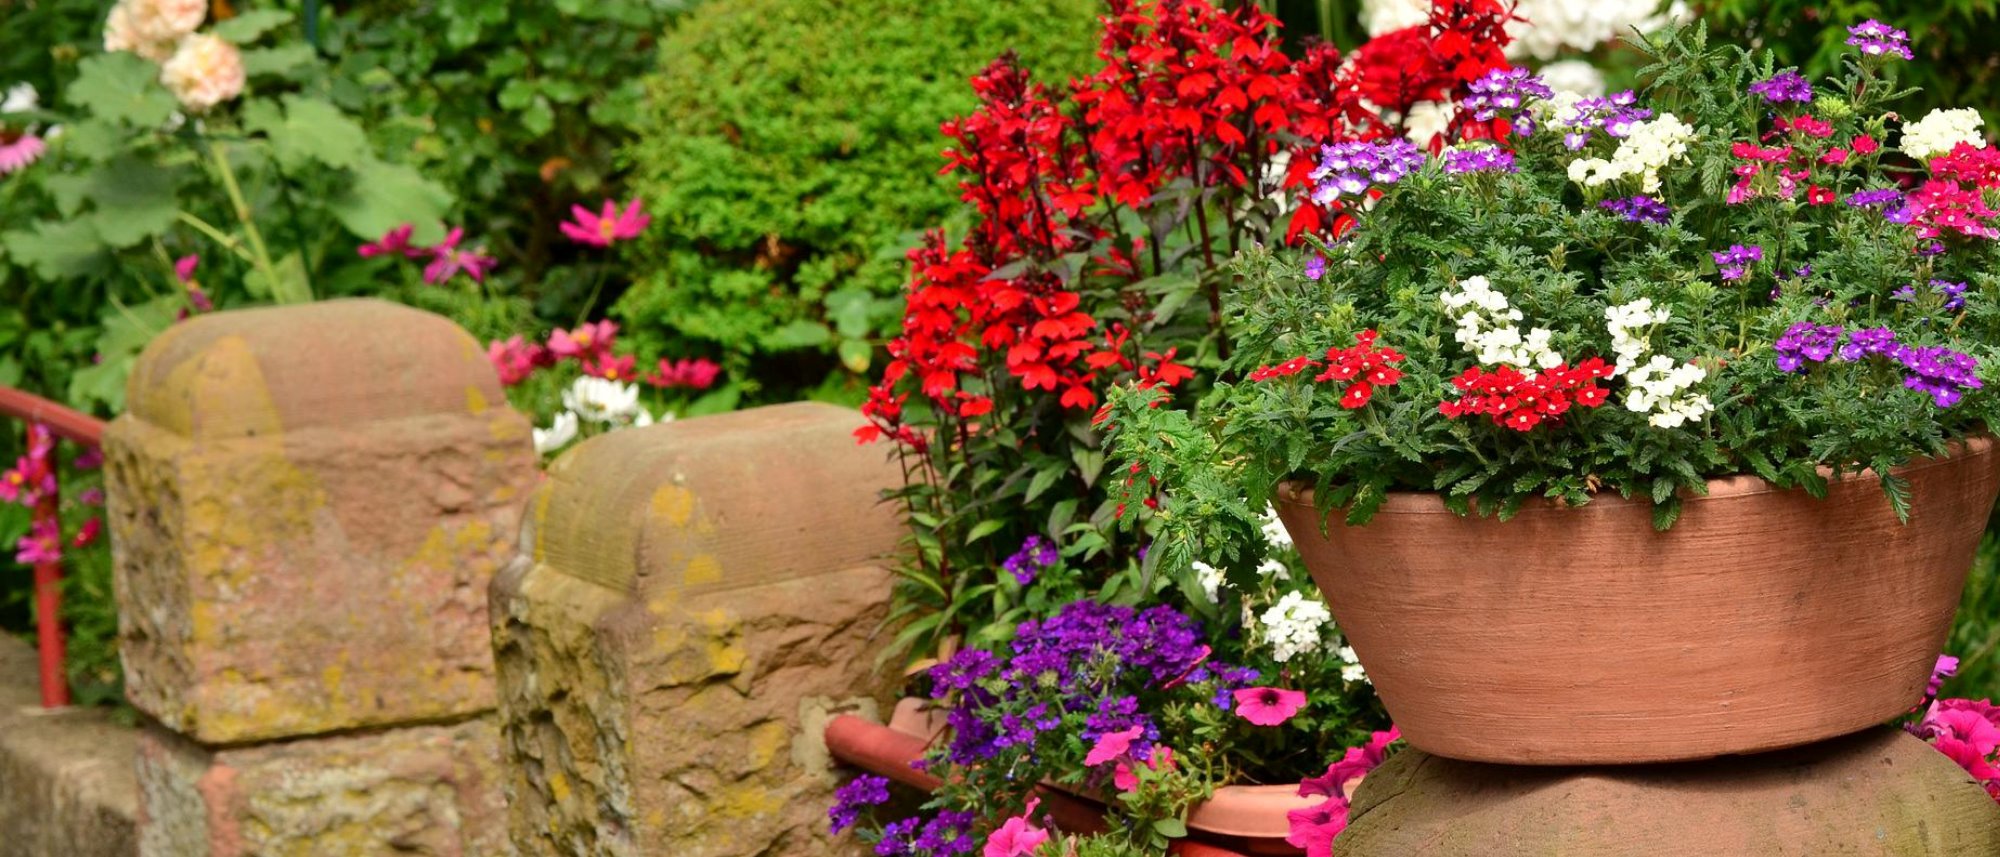 Grow flowers in containers